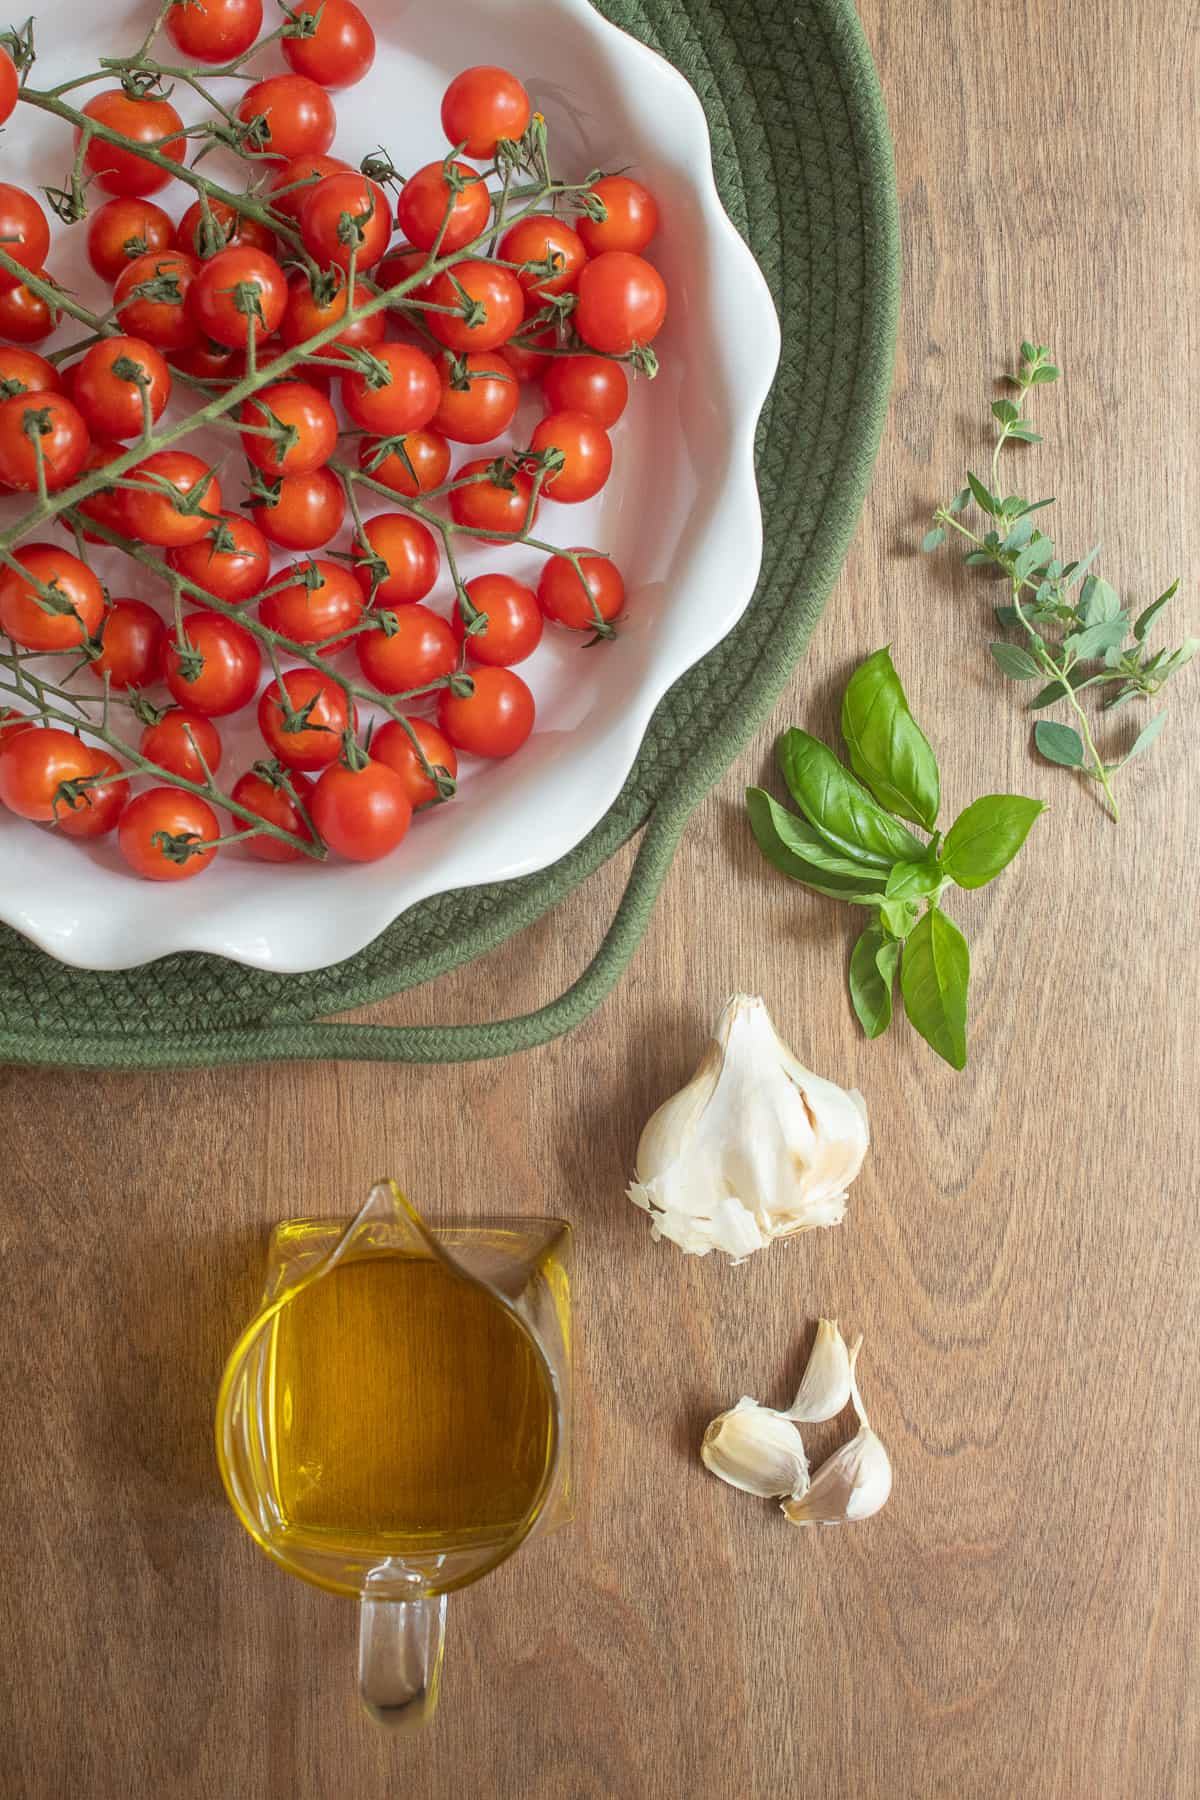 The ingredients for the cherry tomato confit arranged on a wooden surface.